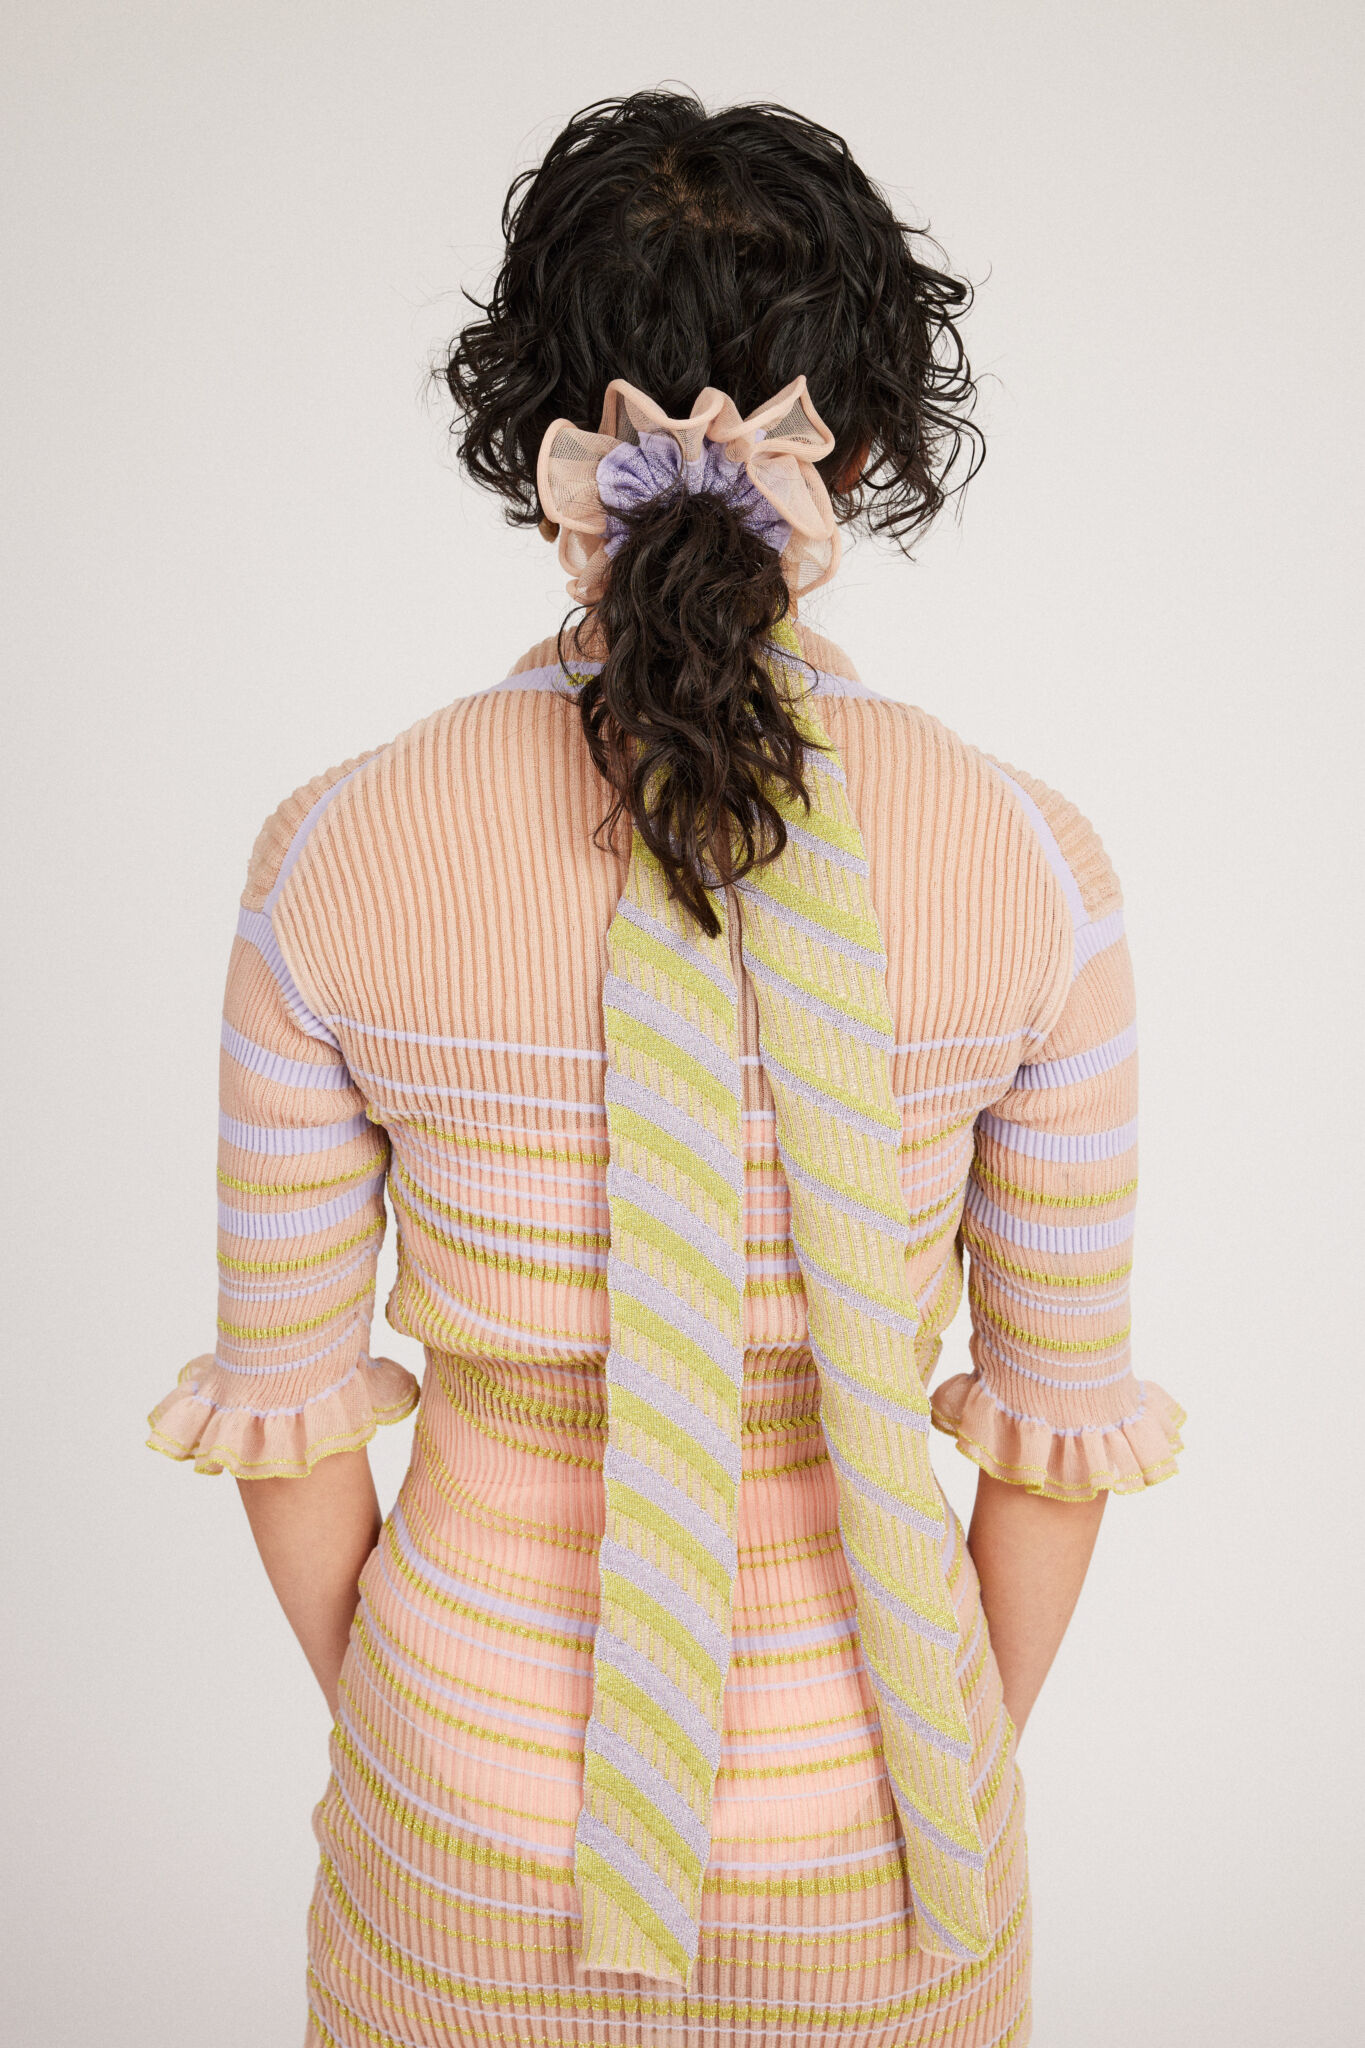 Gazania Scrunchie in peach and lilac, knitted with stripes